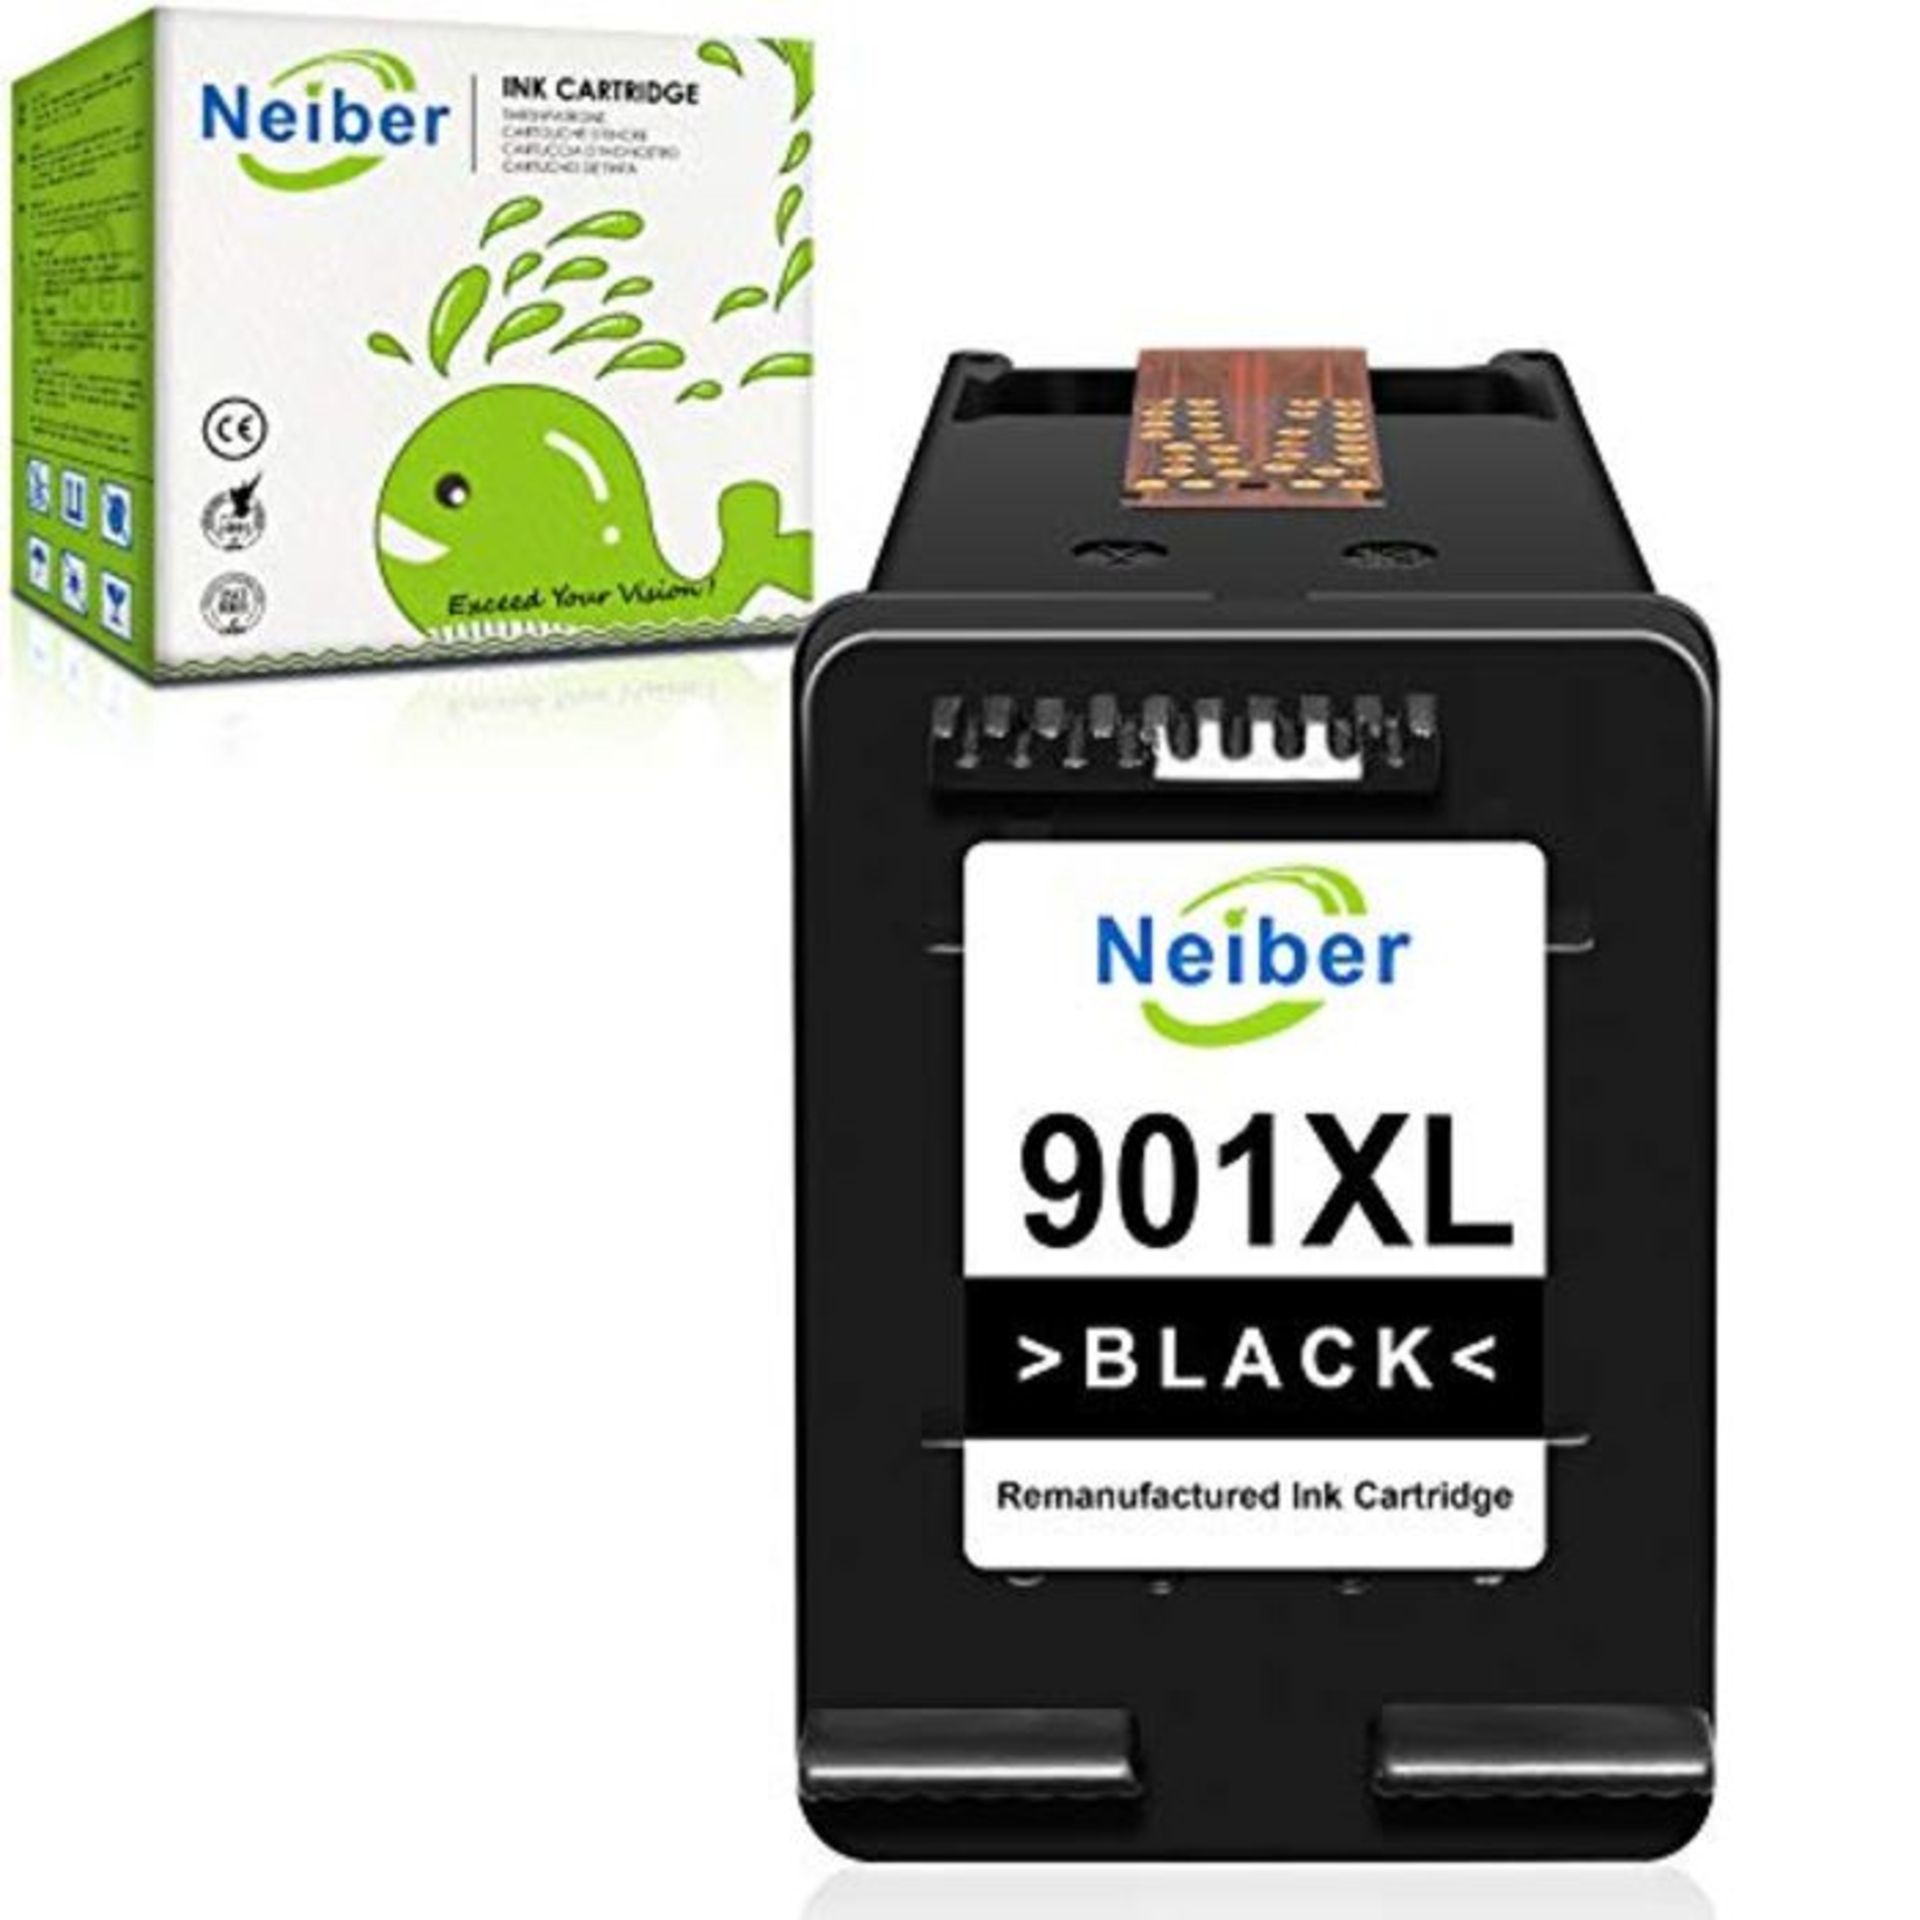 Neiber 901XL Remanufactured Ink Cartridge Compatible for HP 901 XL for HP OfficeJet 45